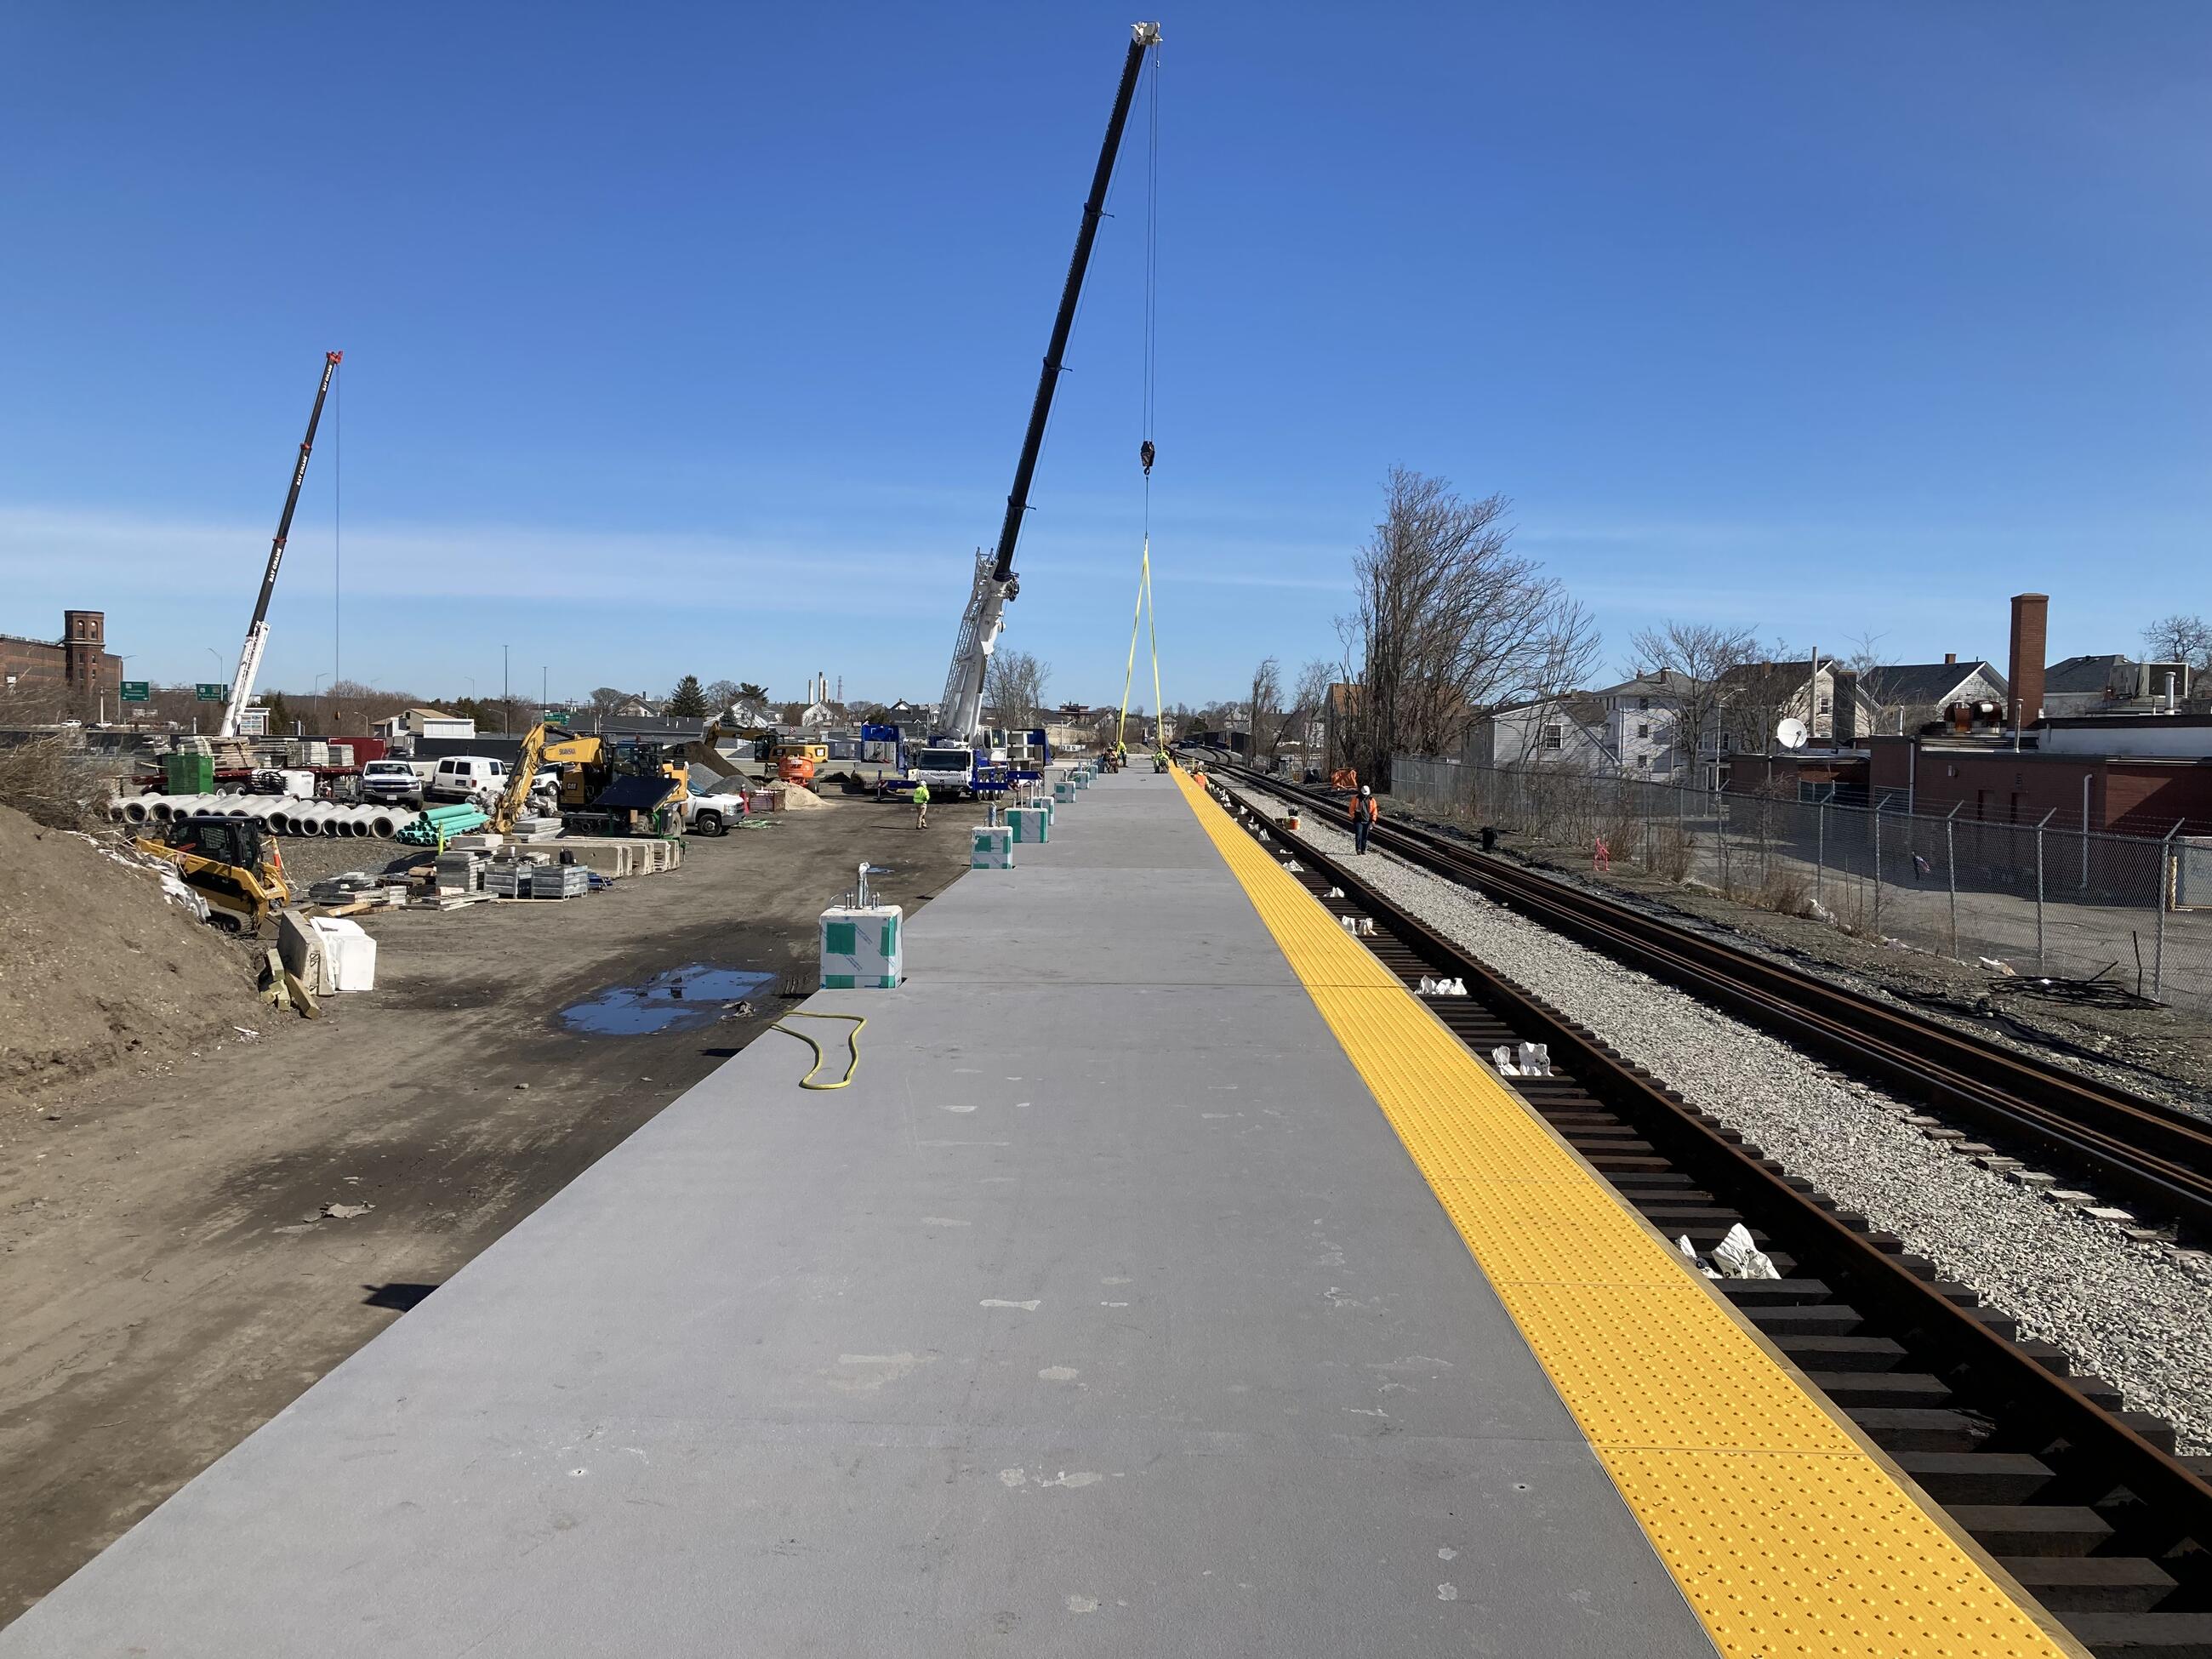 Workers use a crane to put rail platforms into place at the Fall River Depot Station